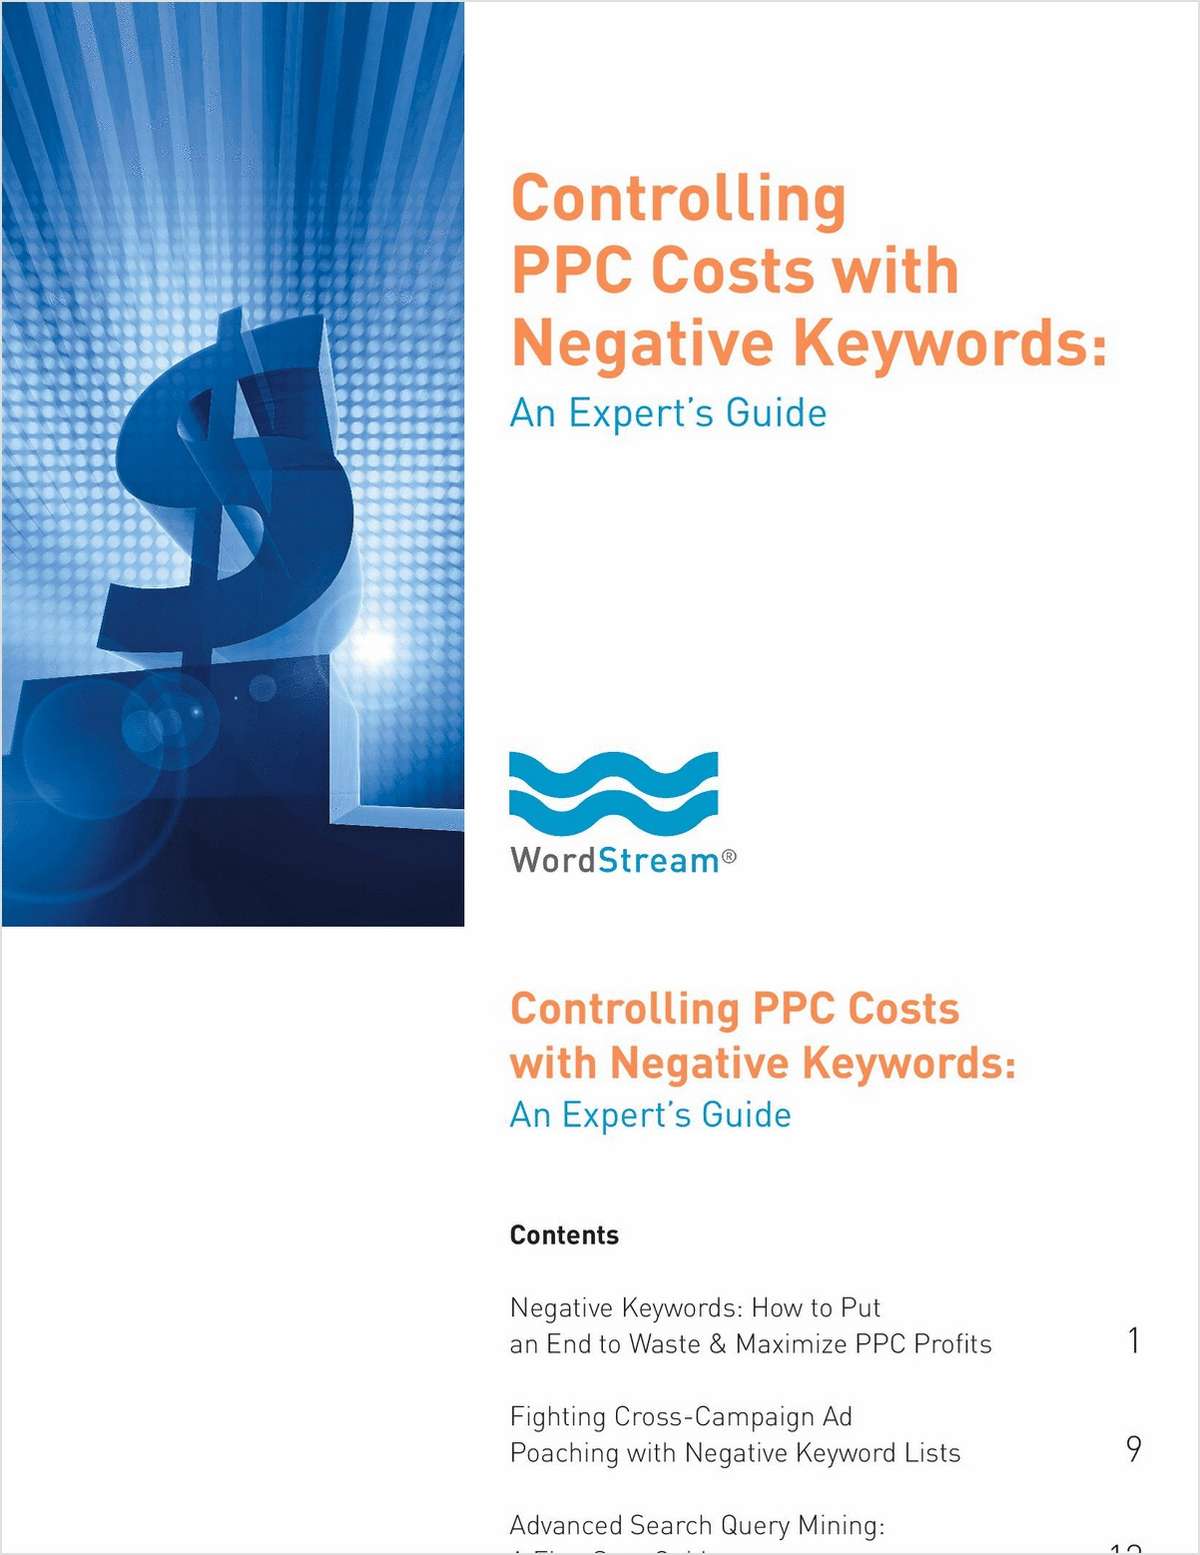 Controlling PPC Costs with Negative Keywords: An Expert's Guide